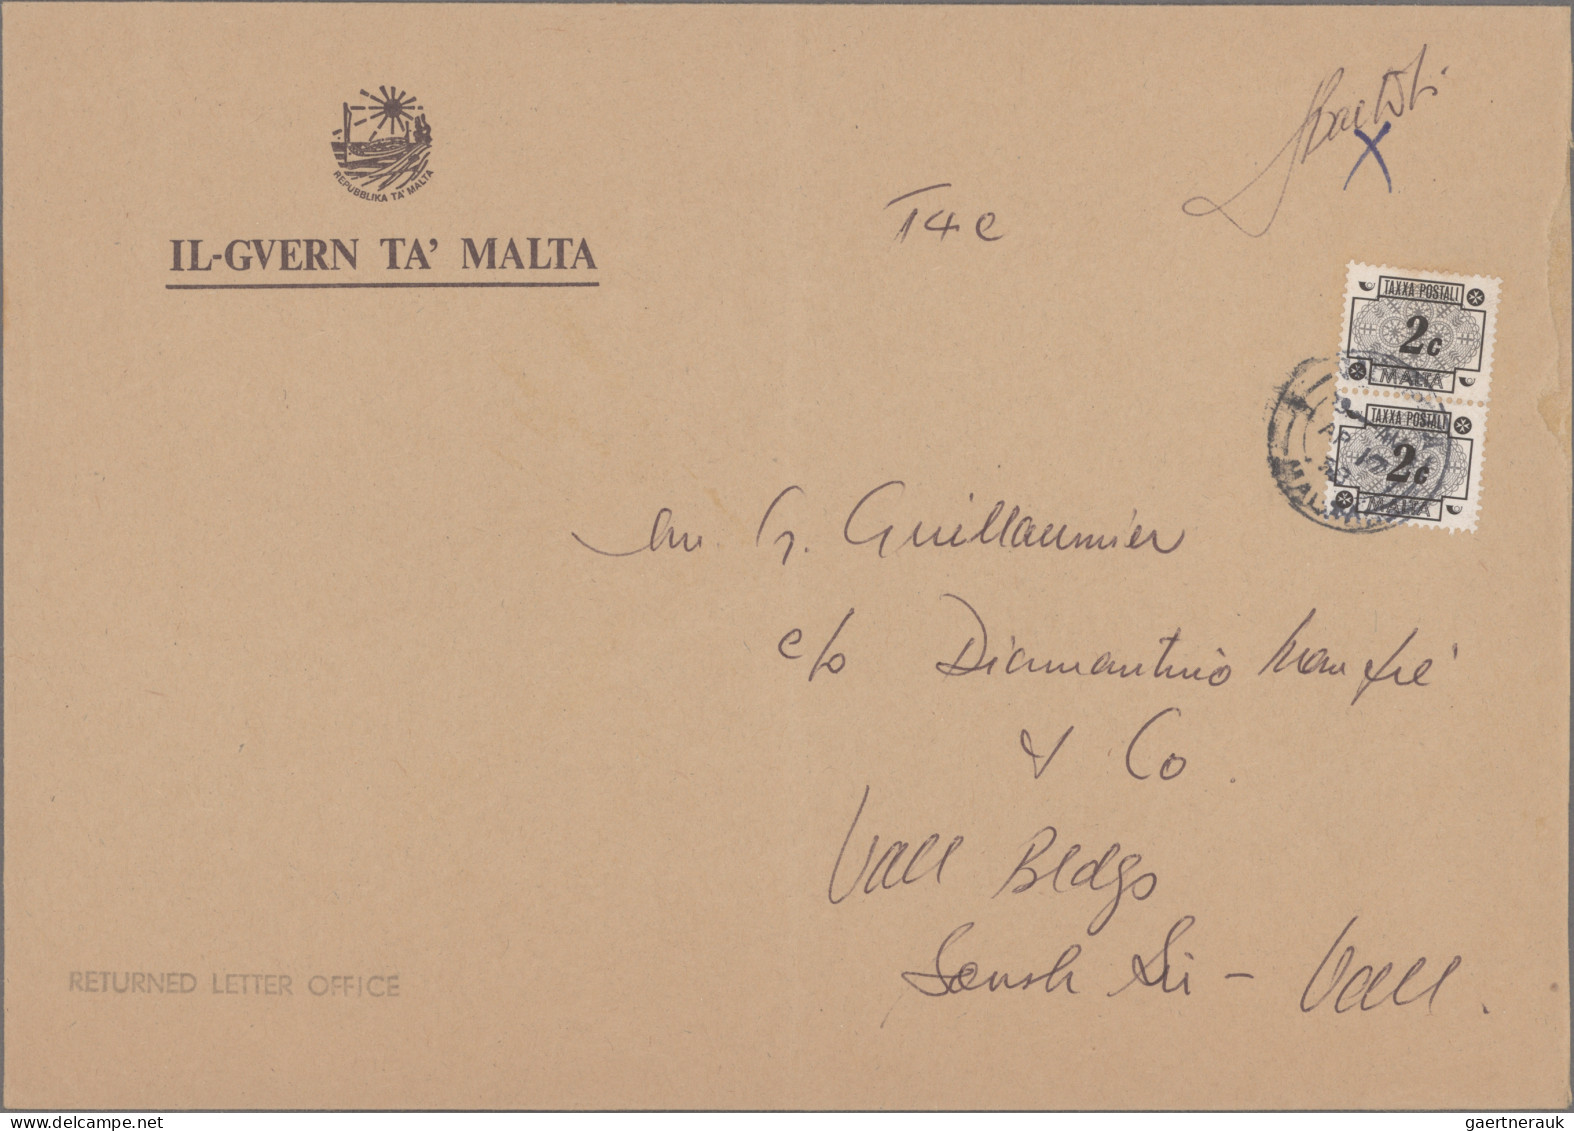 Malta: 1910/2005, comprehensive collection of apprx. 330 covers/cards, incl. off